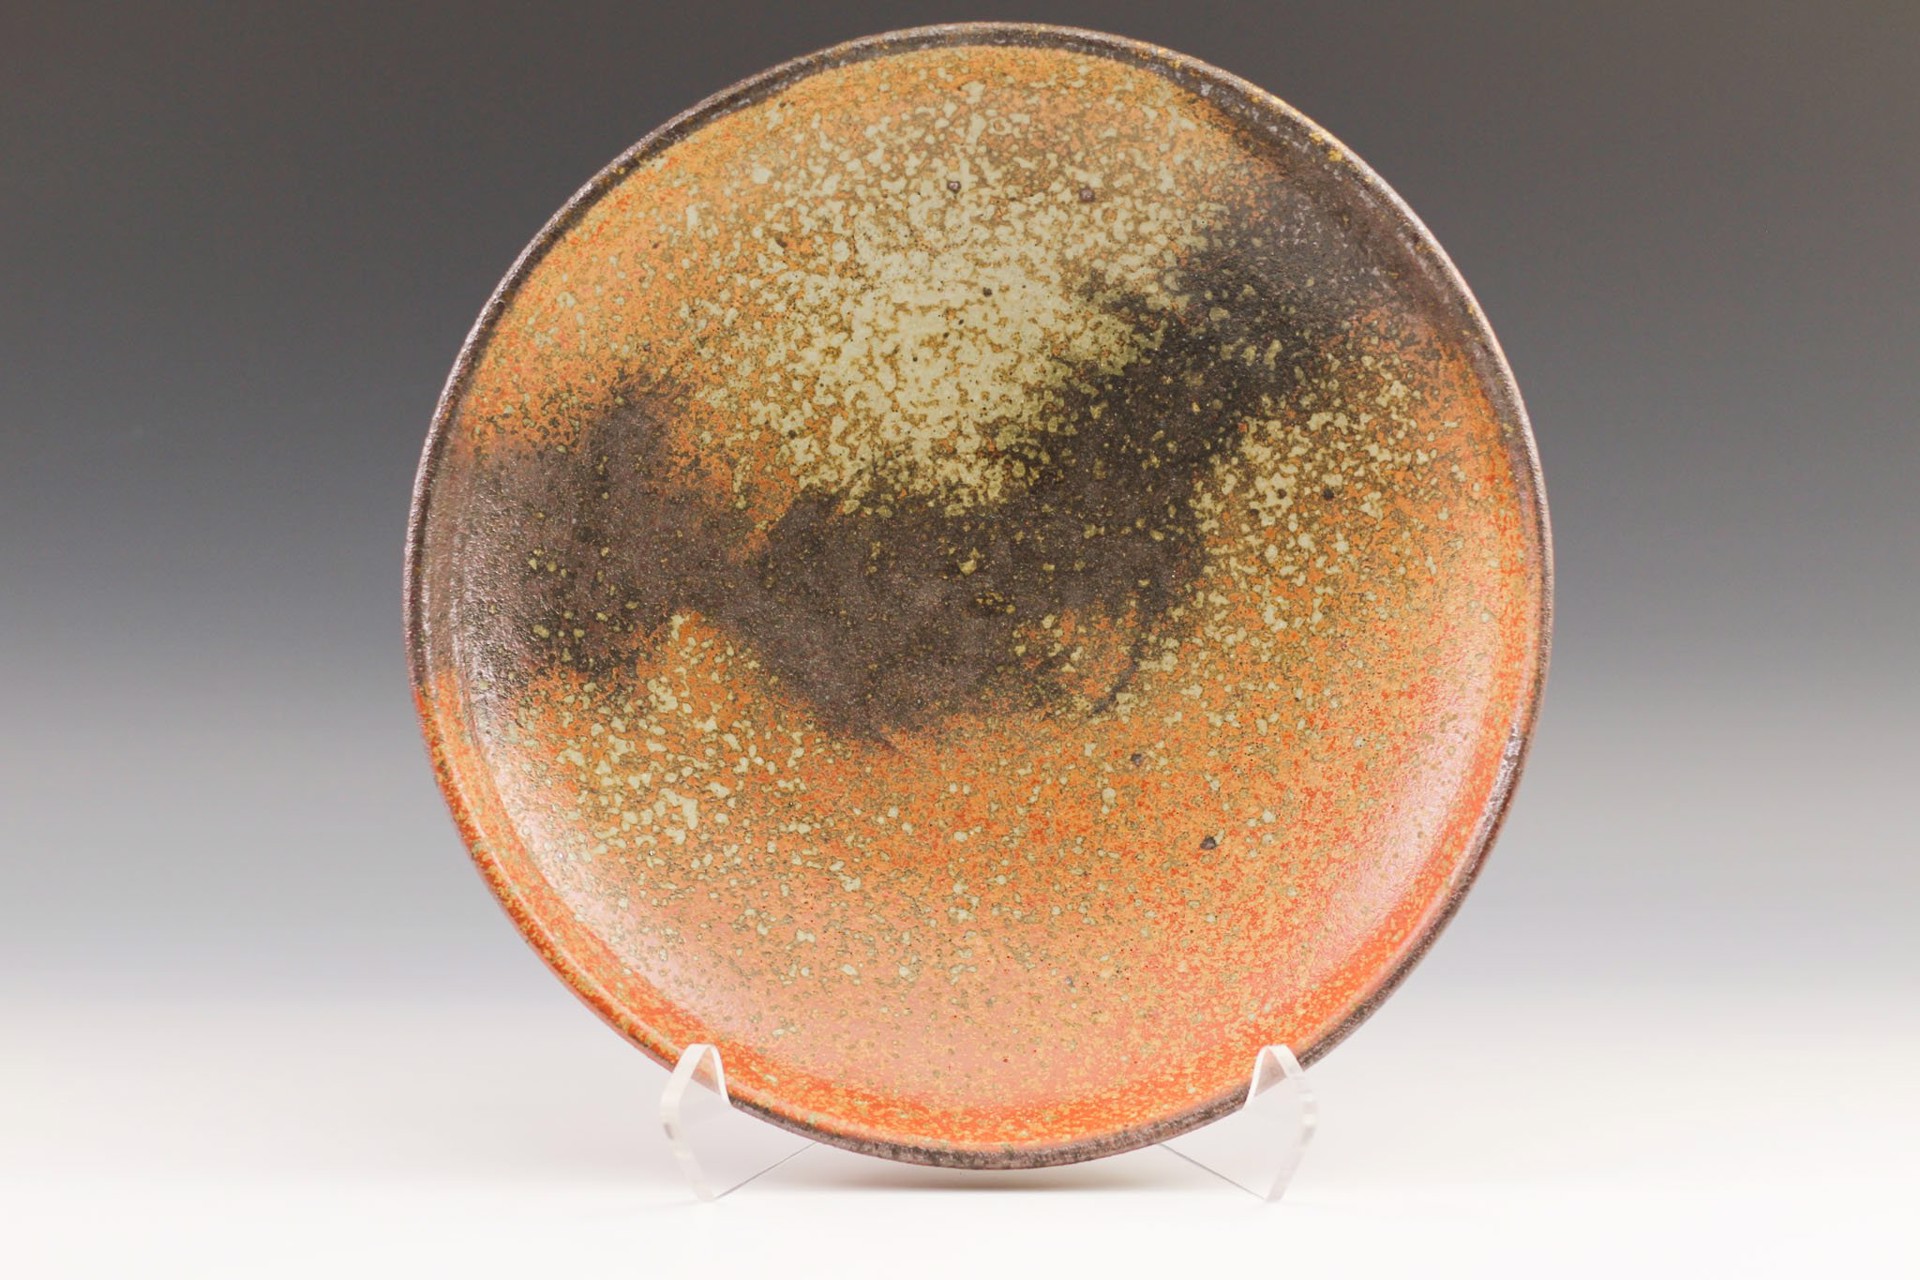 Large Low Bowl by George Lowe